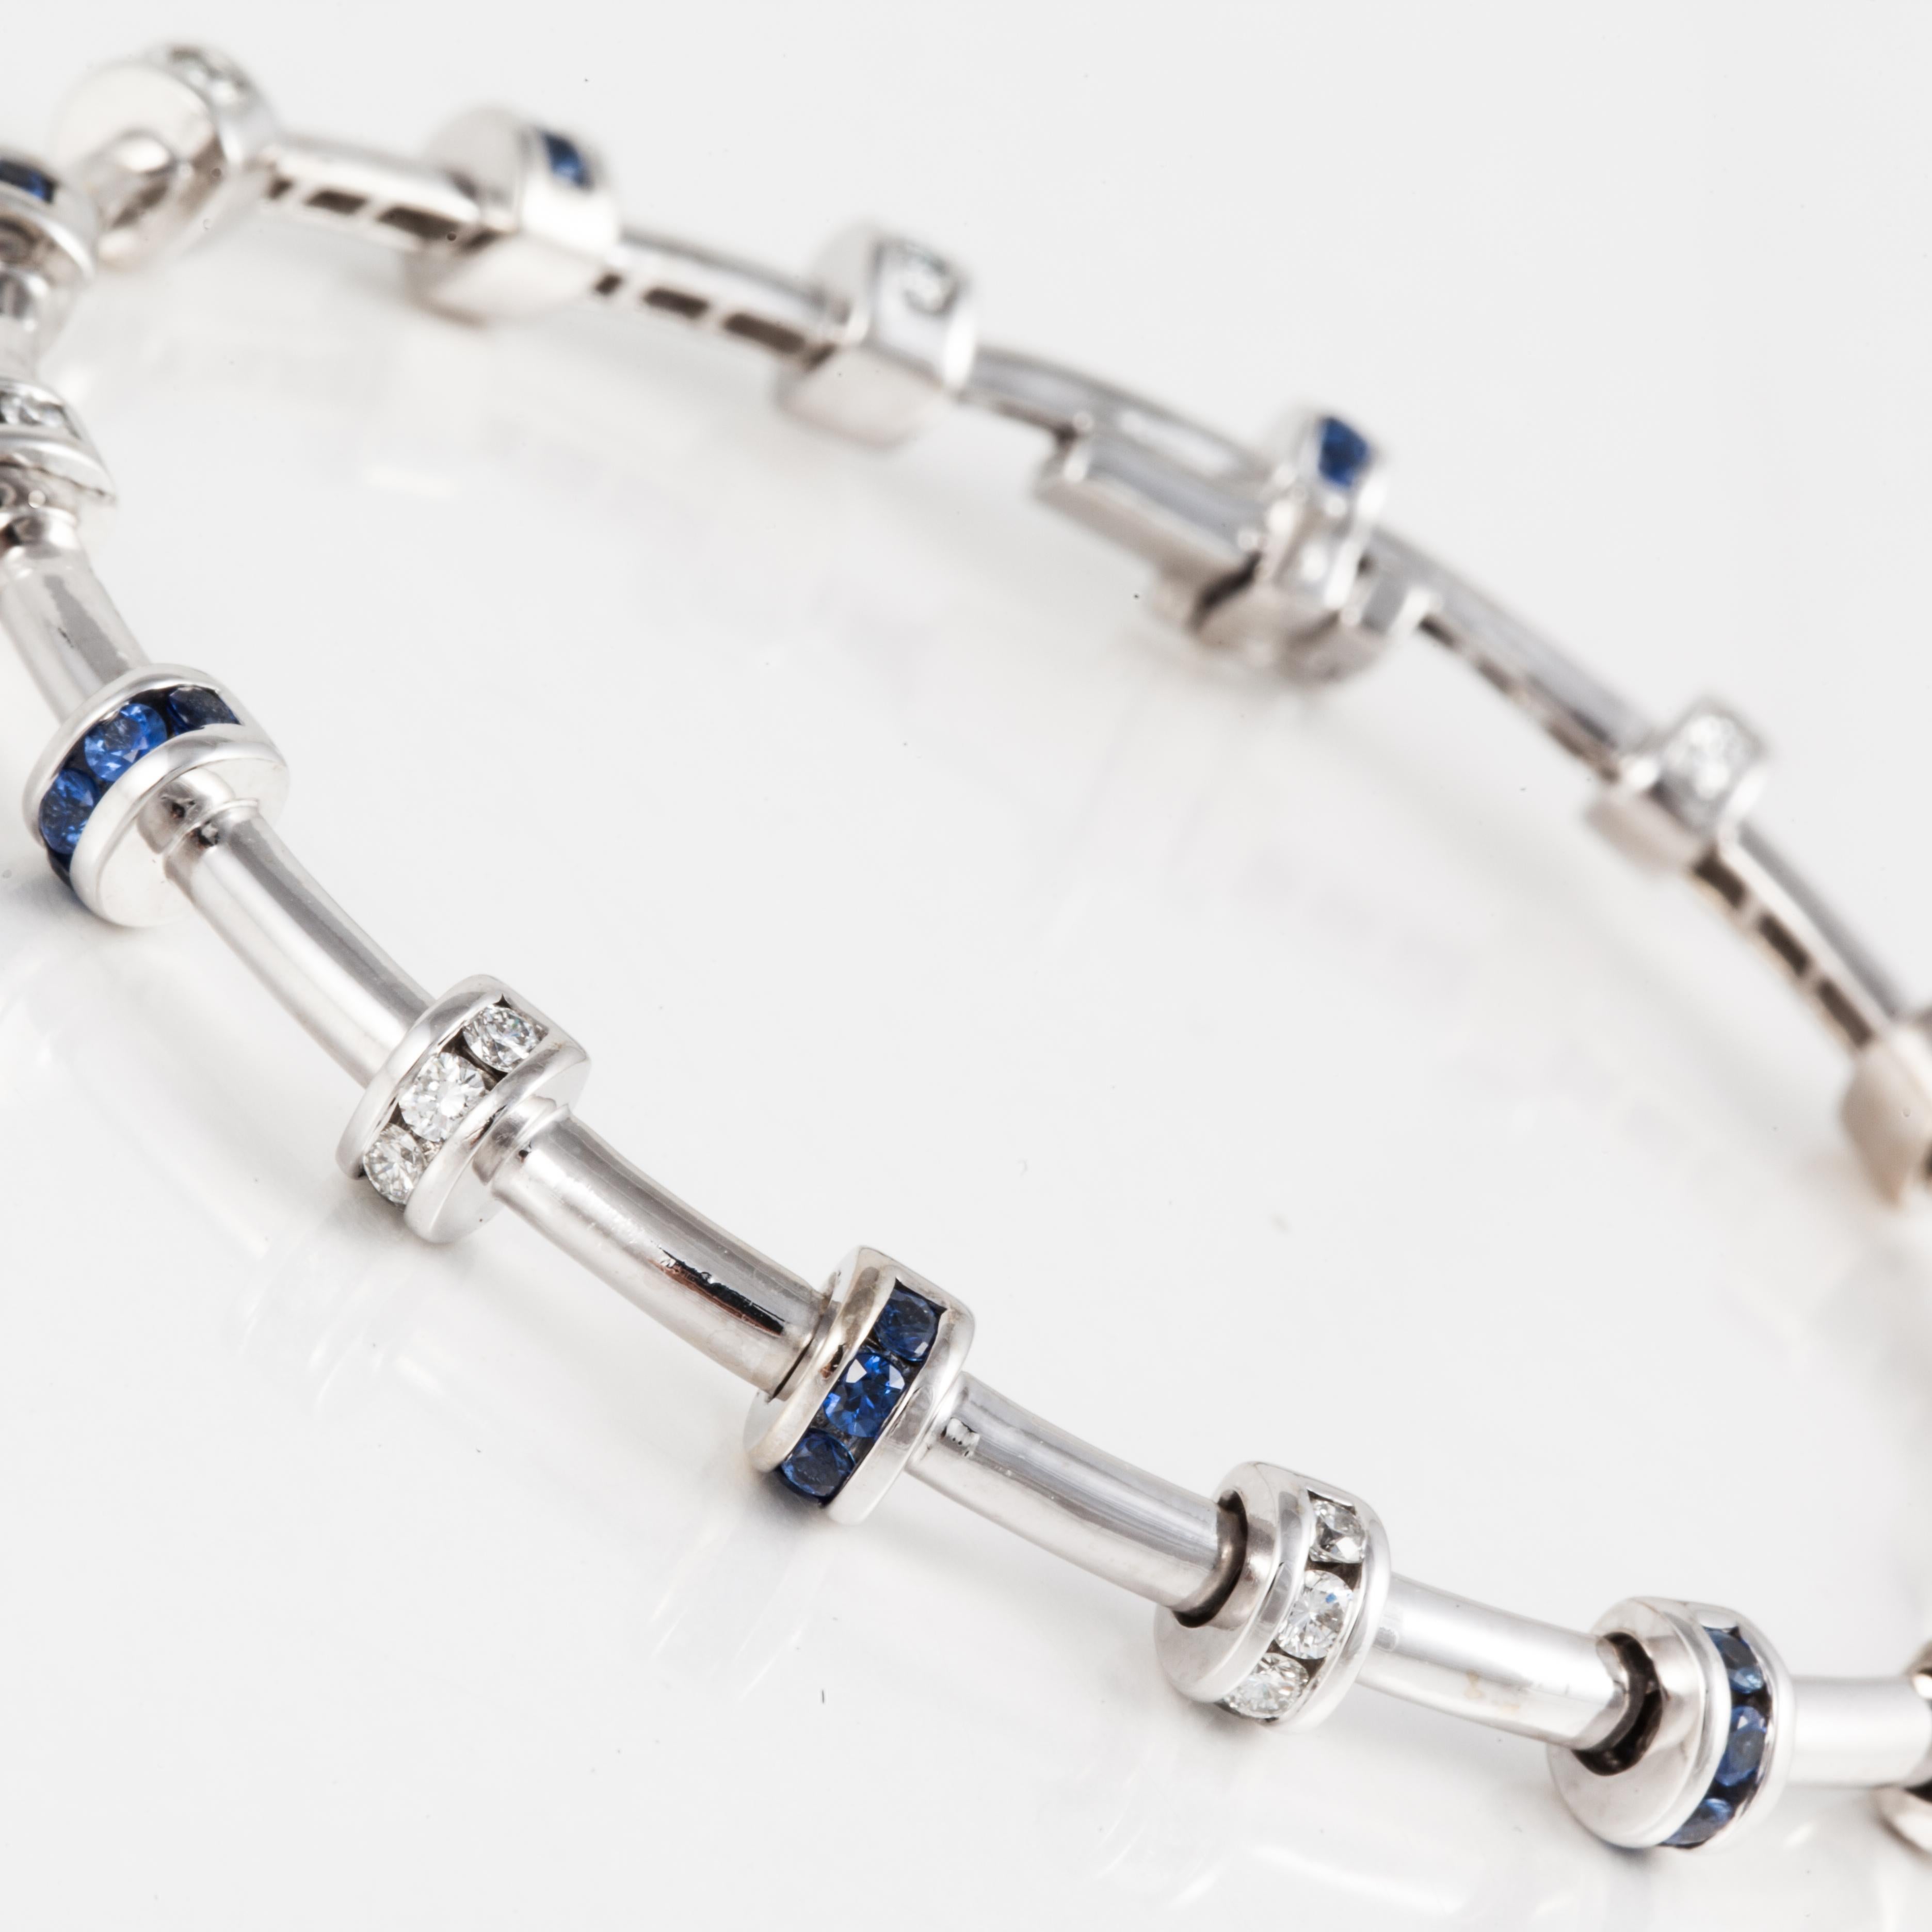 Bracelet by Charles Krypell is 18K white gold featuring diamonds and sapphires.  The bracelet is marked 